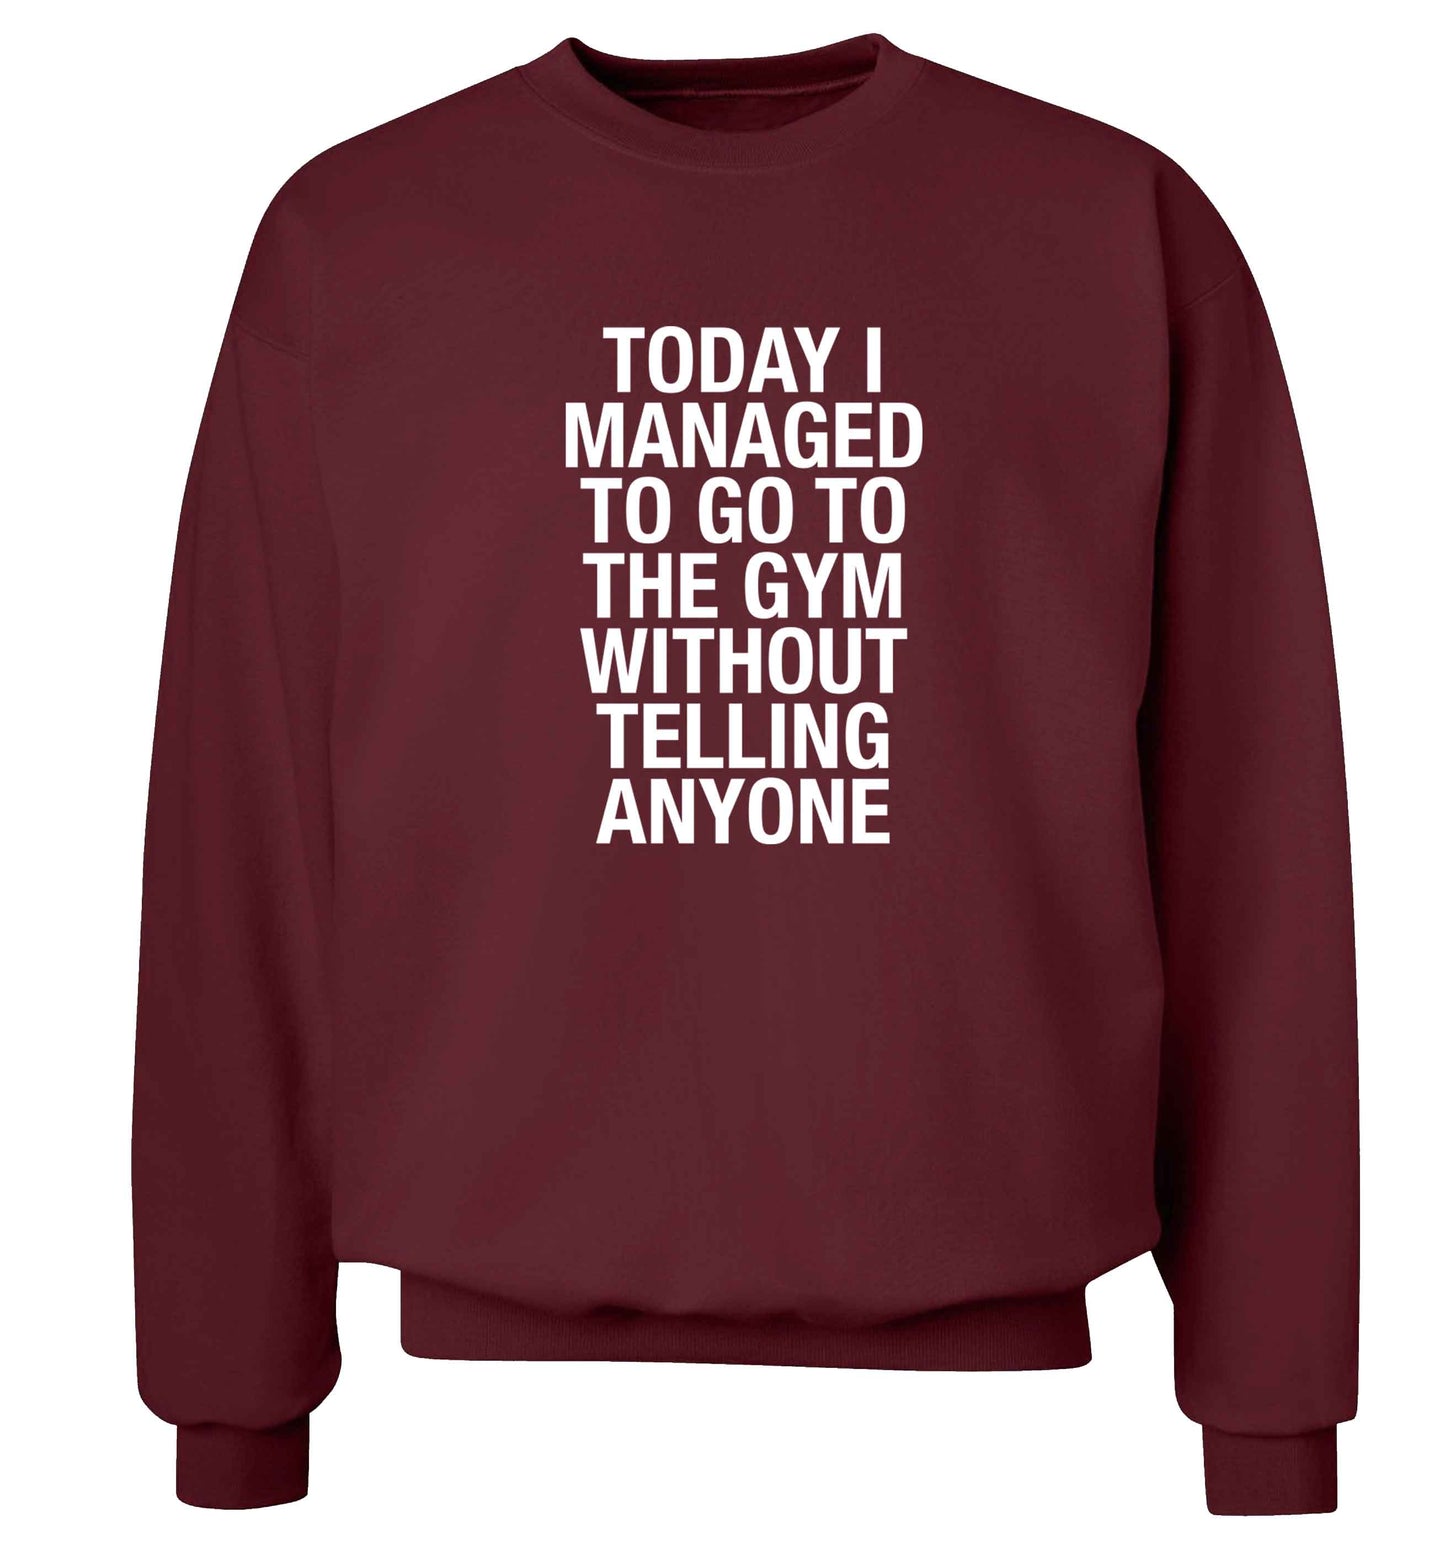 Today I managed to go to the gym without telling anyone adult's unisex maroon sweater 2XL